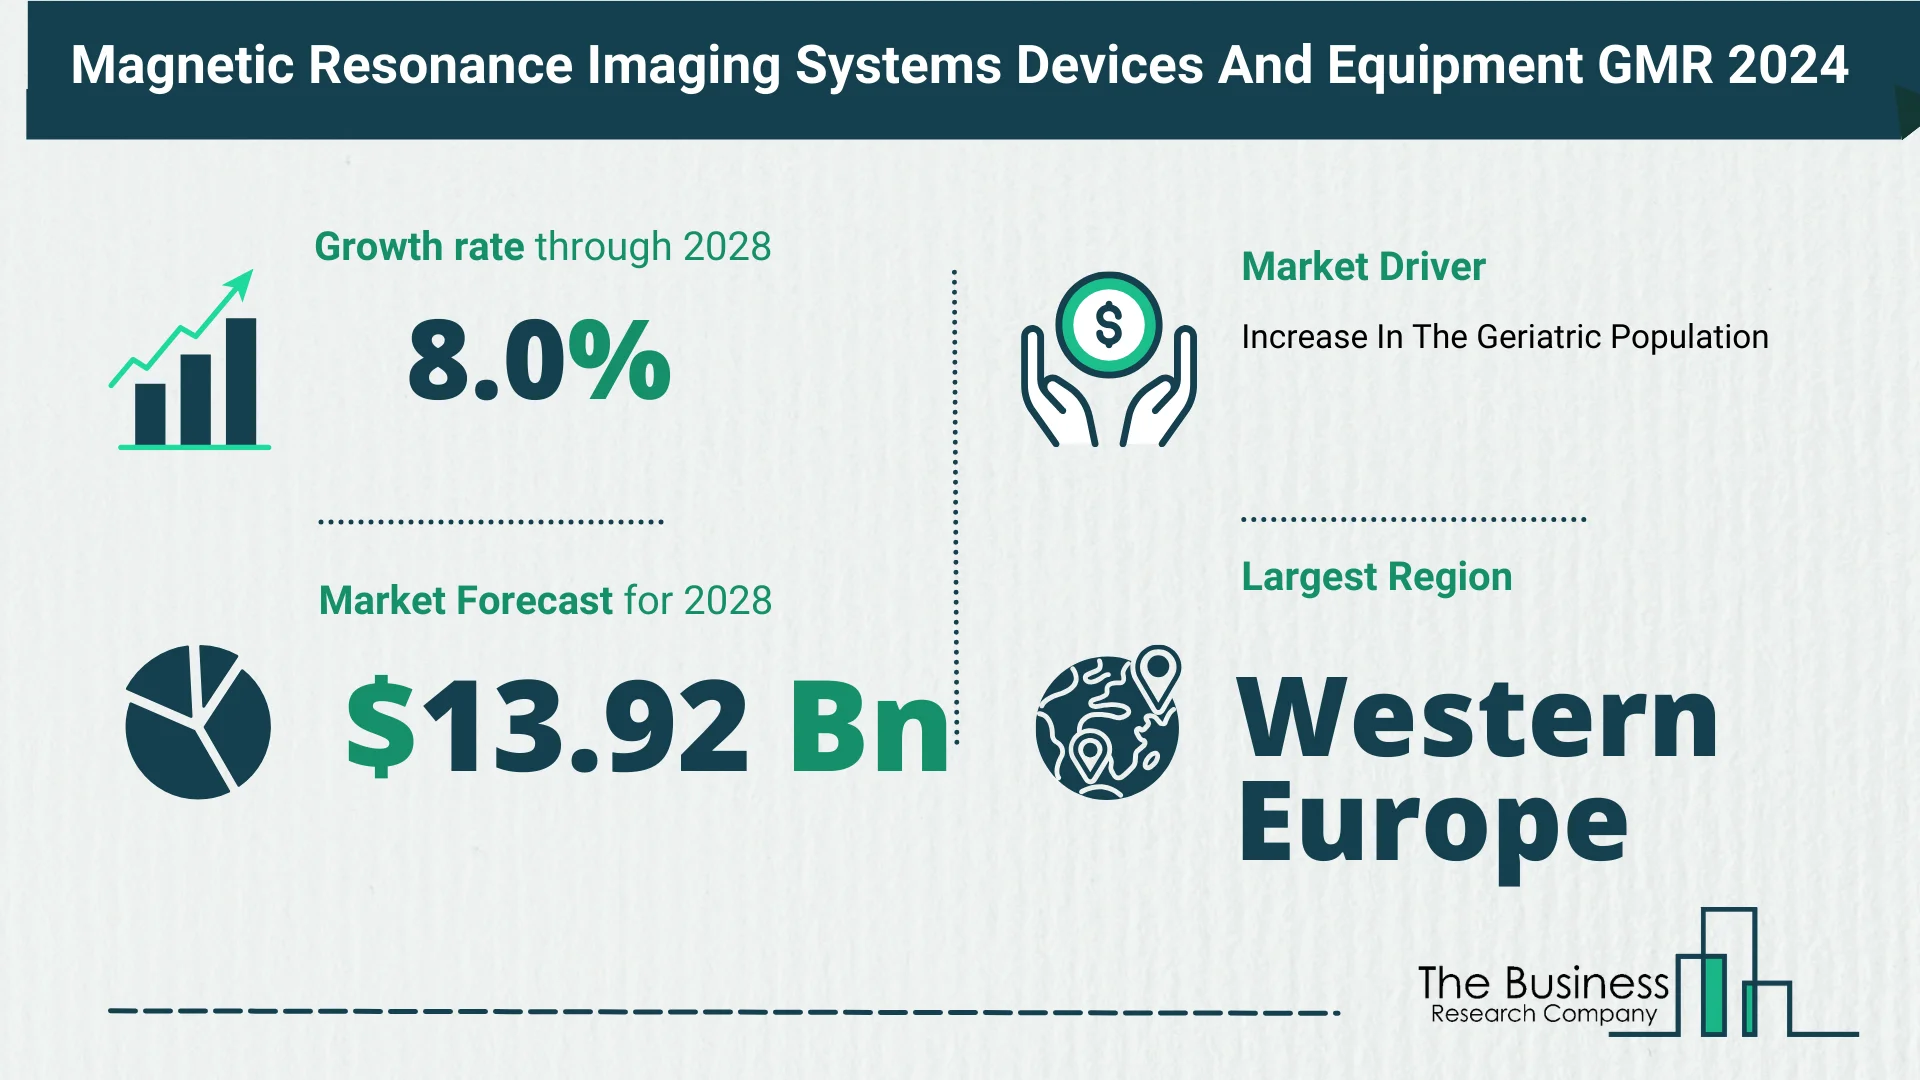 Global Magnetic Resonance Imaging Systems Devices And Equipment Market Size